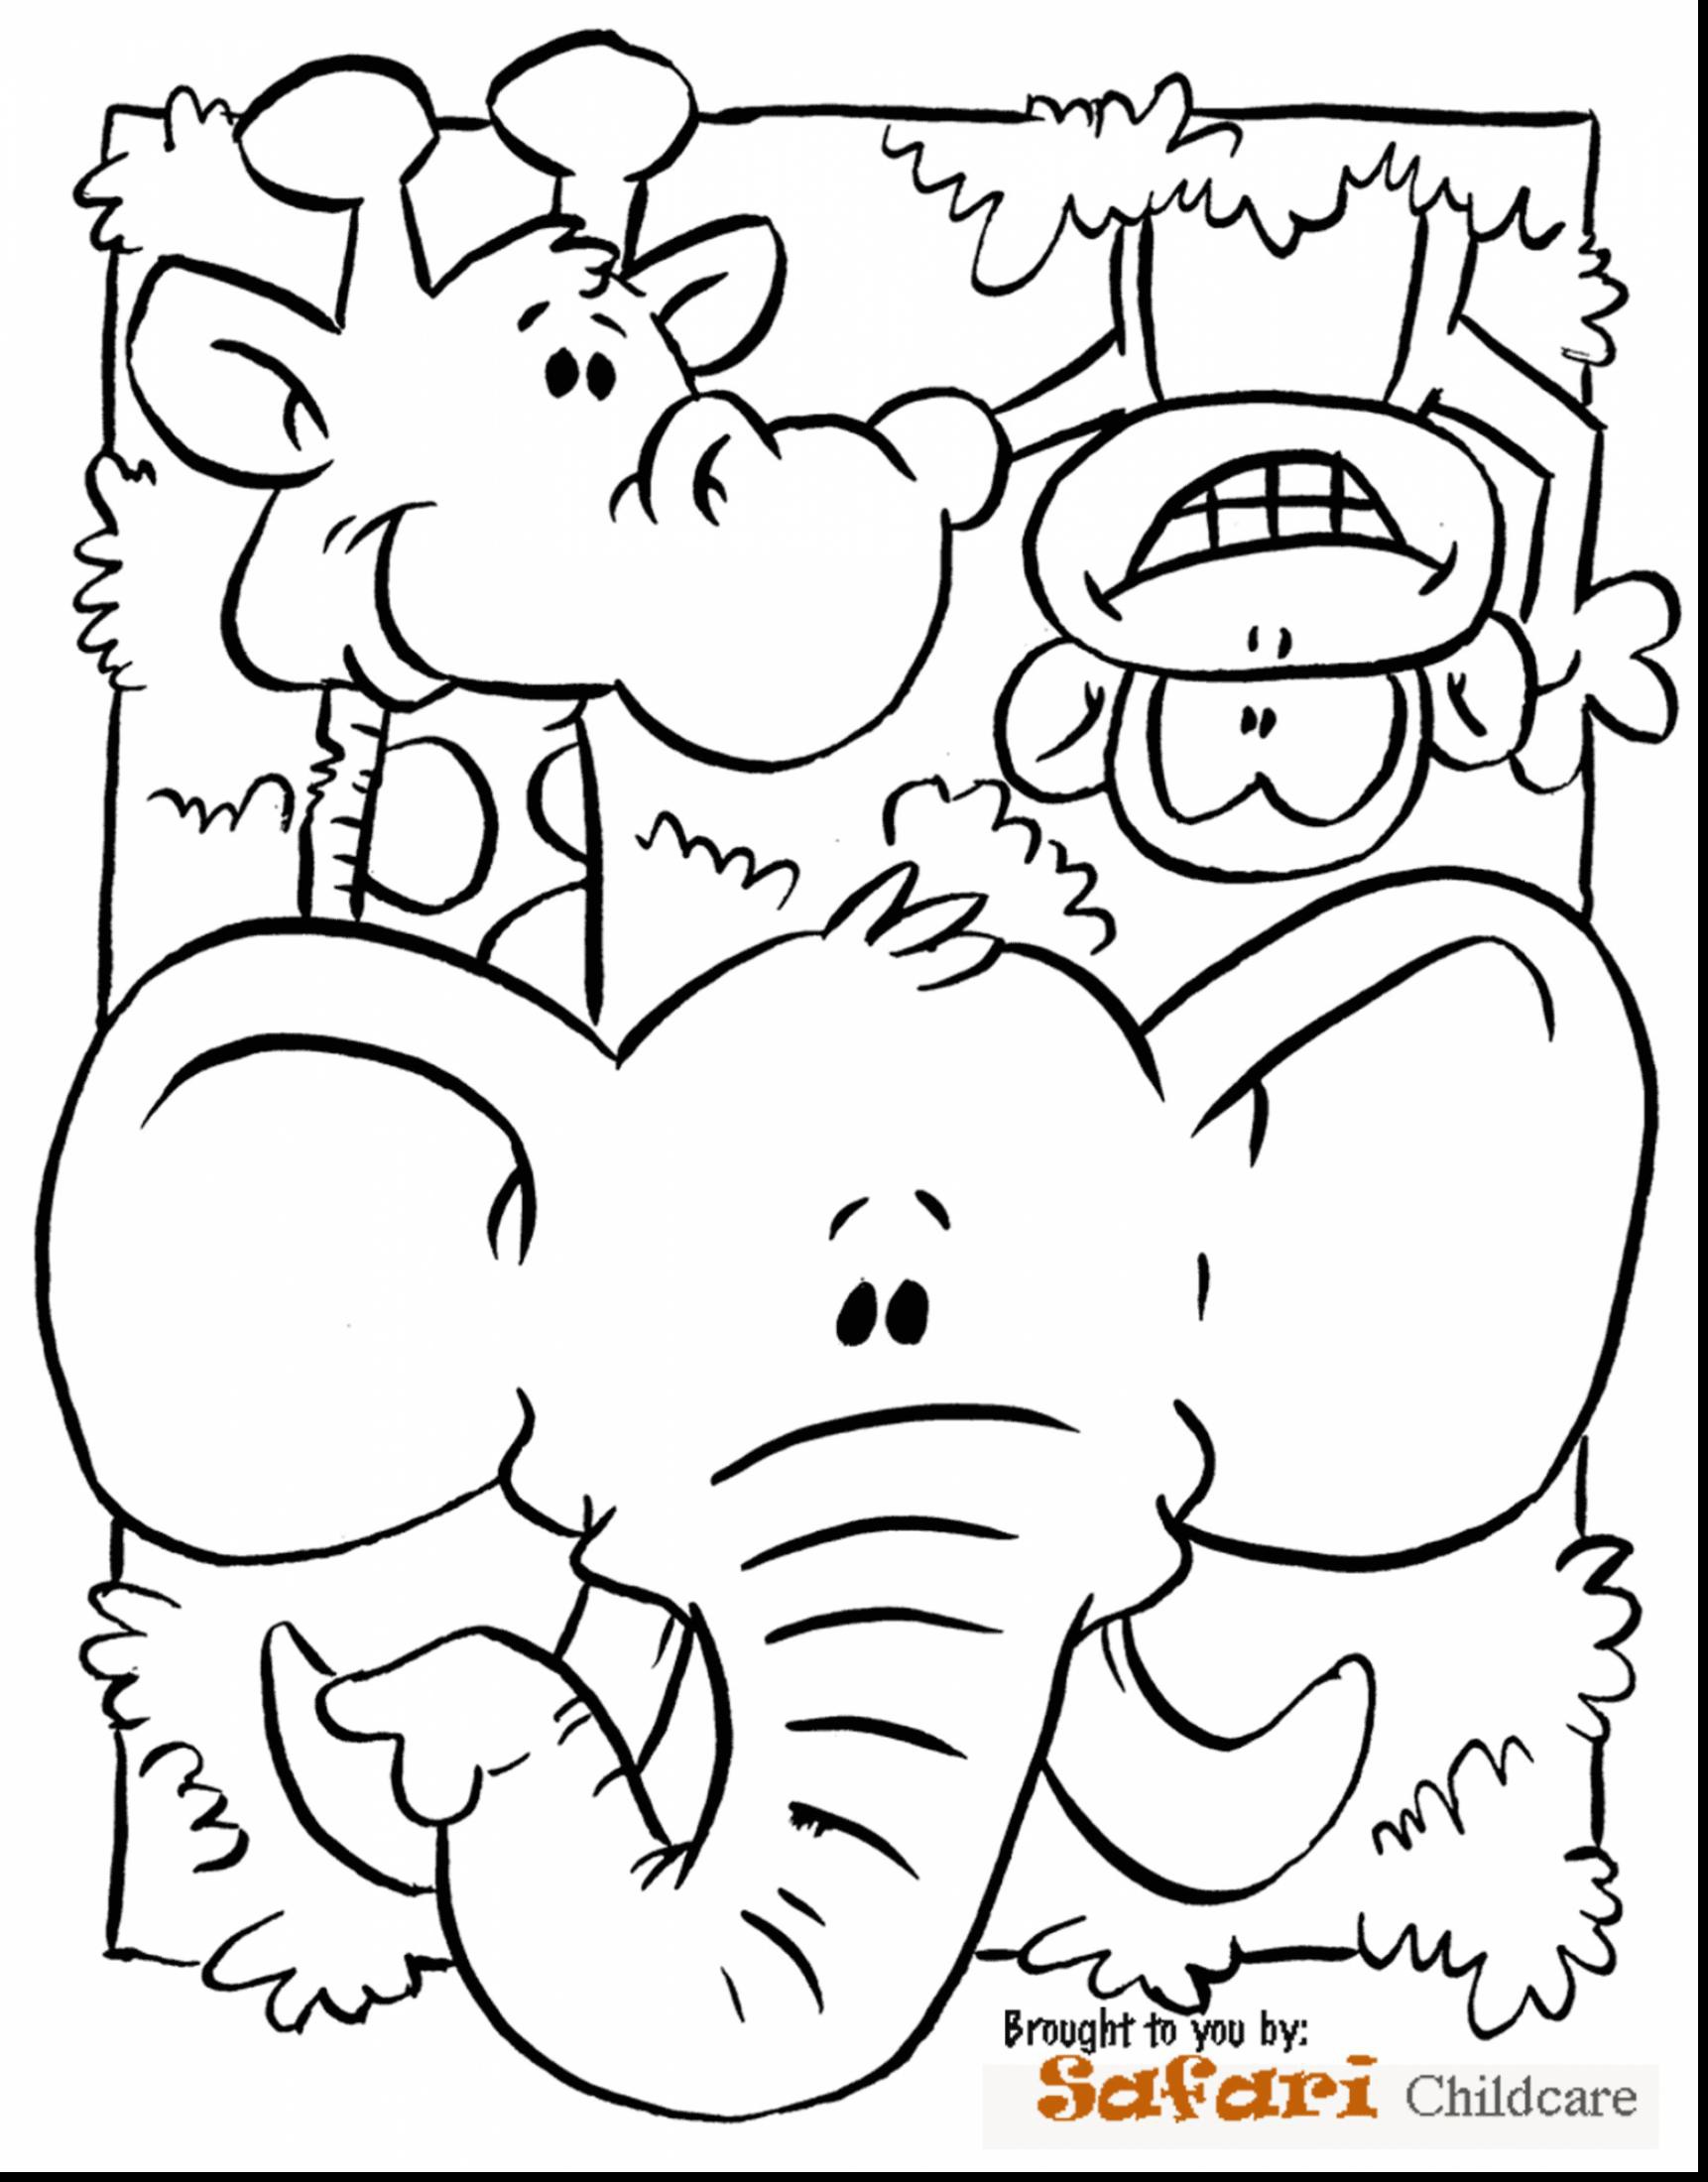 Elegant Jungle Animal Coloring Pages 71 For Your Coloring Pages line with Jungle Animal Coloring Pages